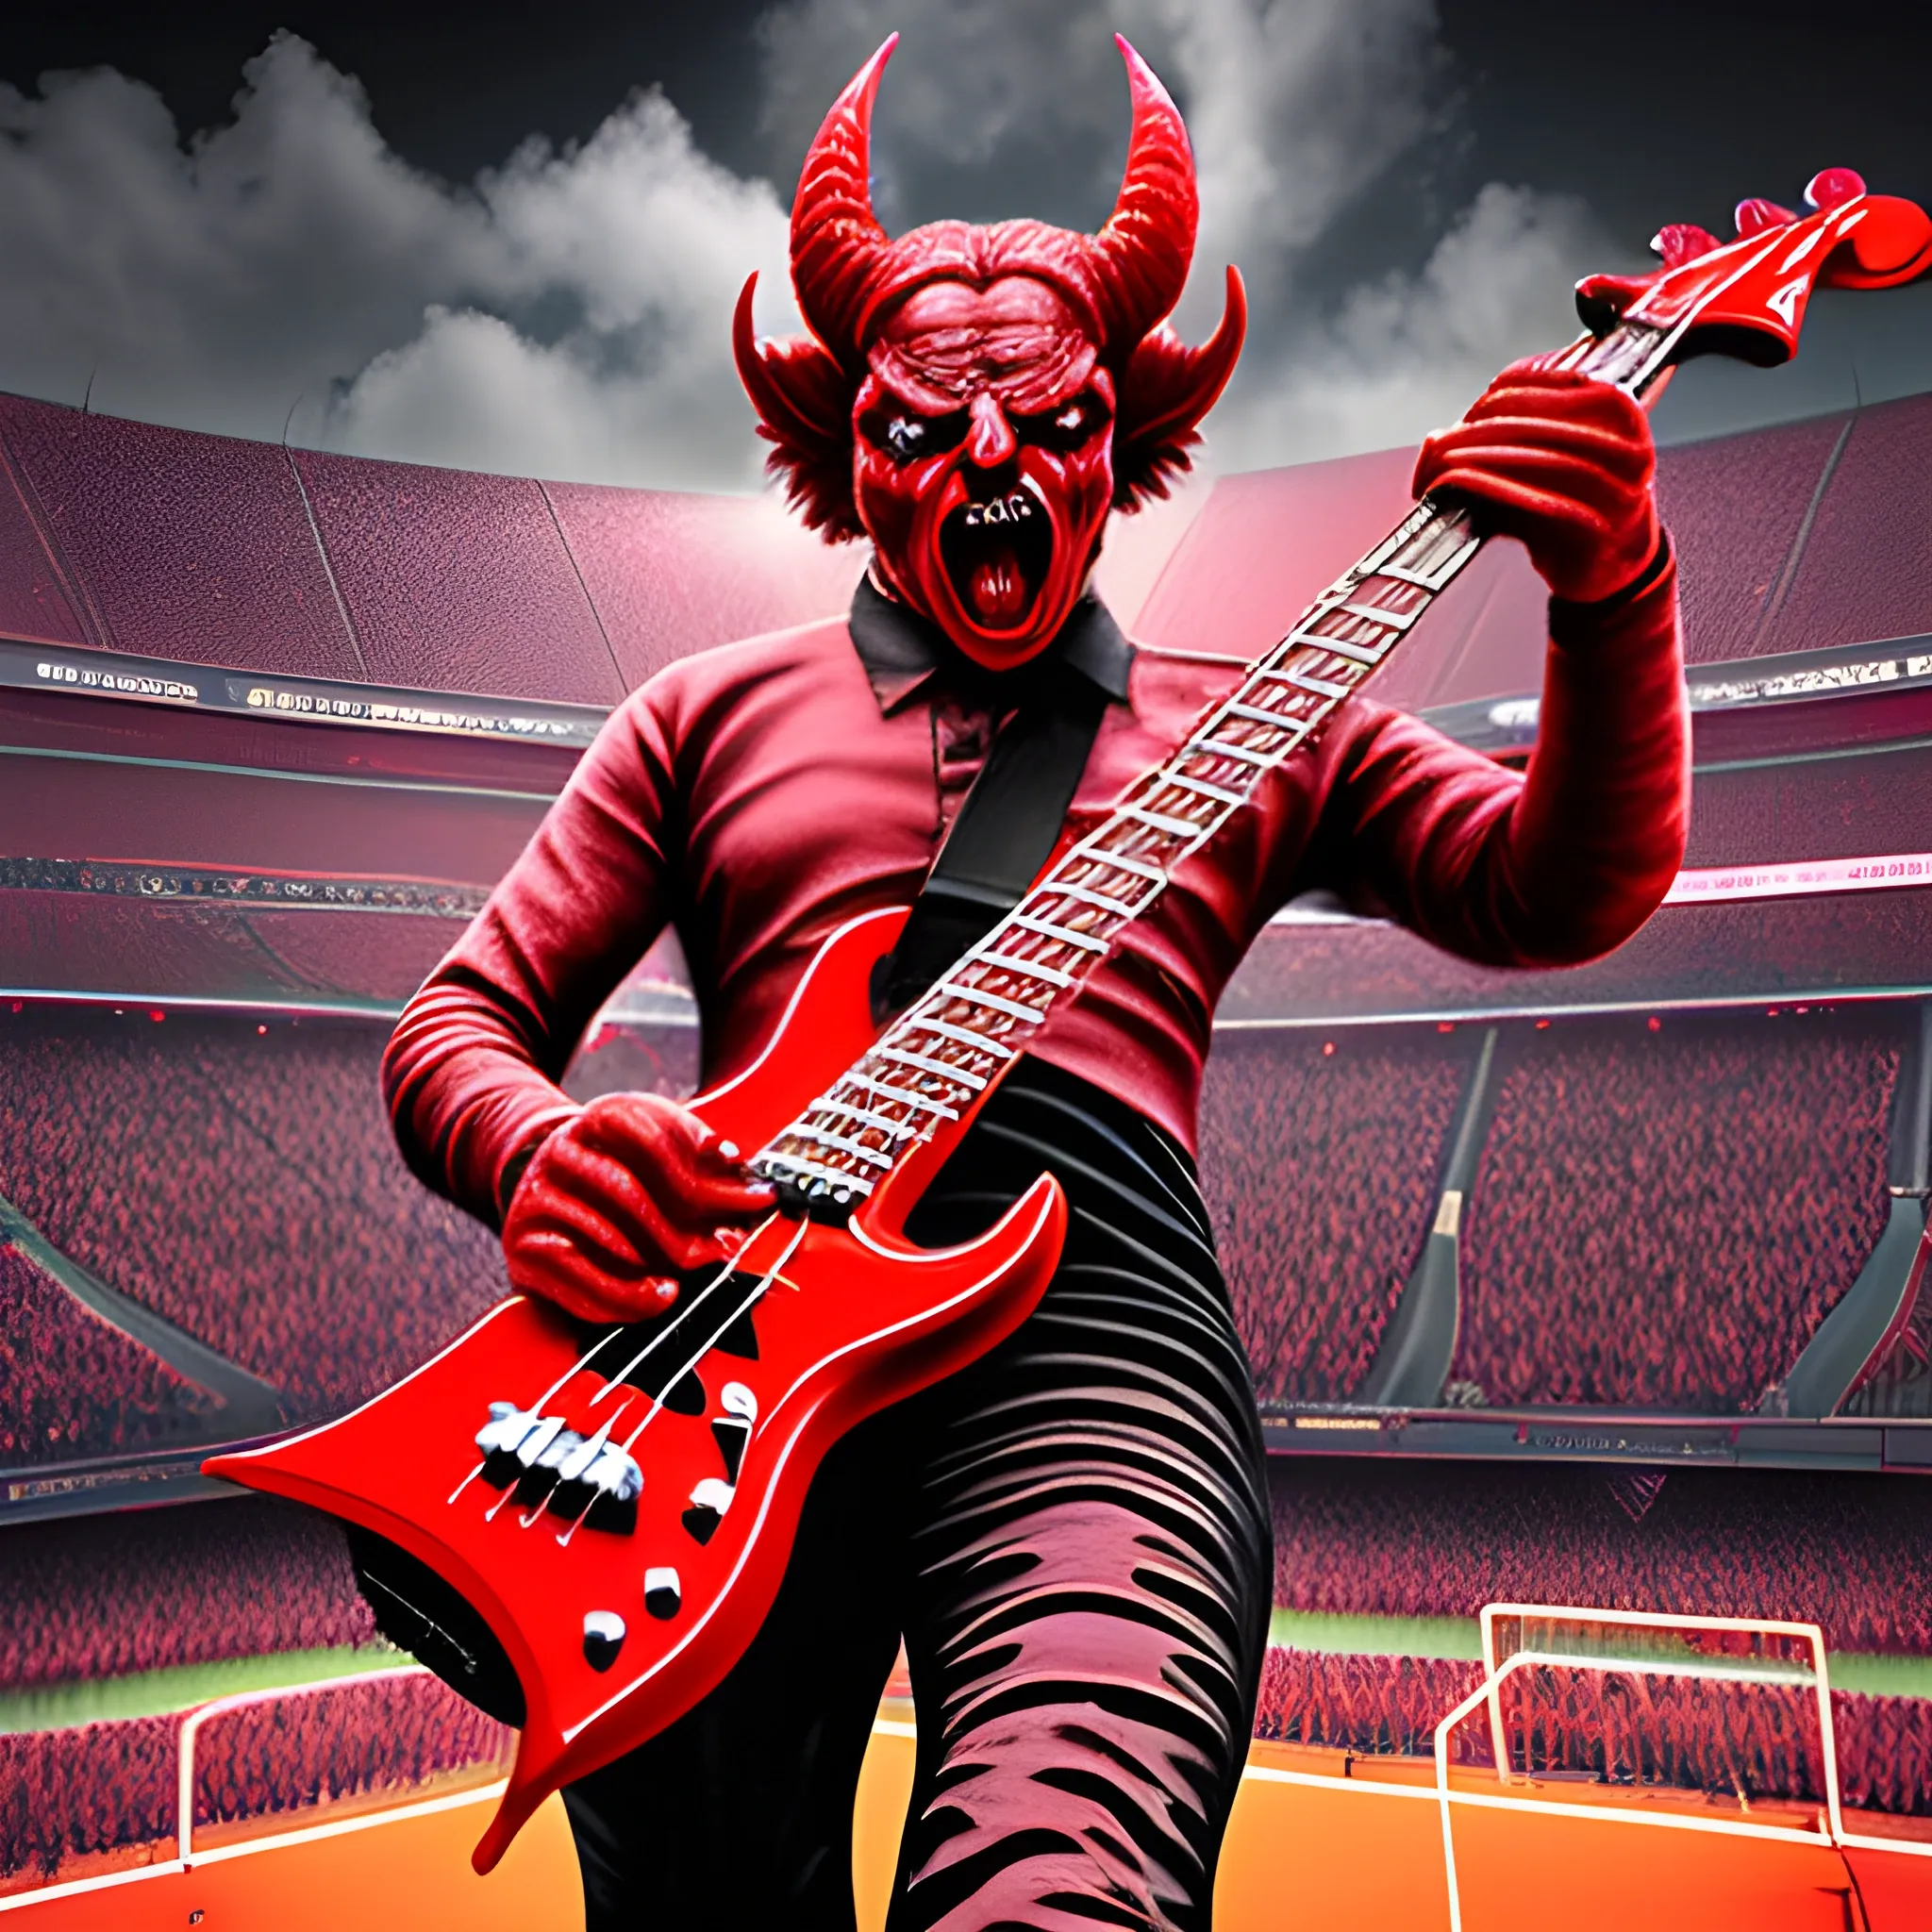 Trippy, create a realistic image of the devil playing a red five-string electric bass on a stadium stage in front of many people